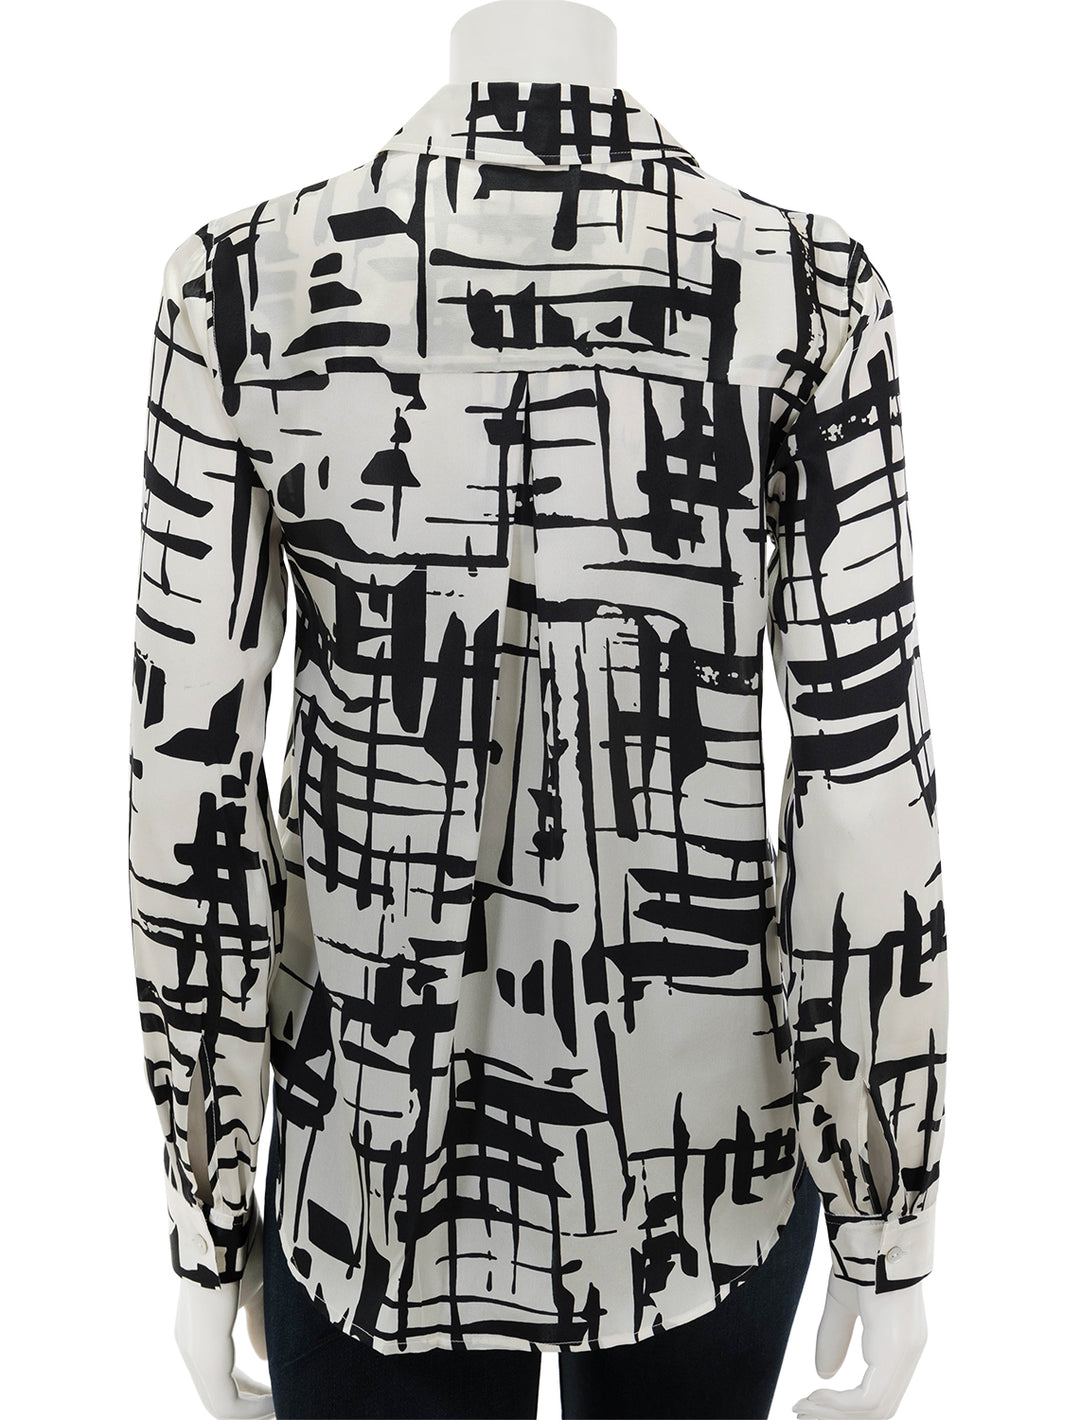 Back view of L'agence's tyler long sleeve blouse in ivory and black sketch.